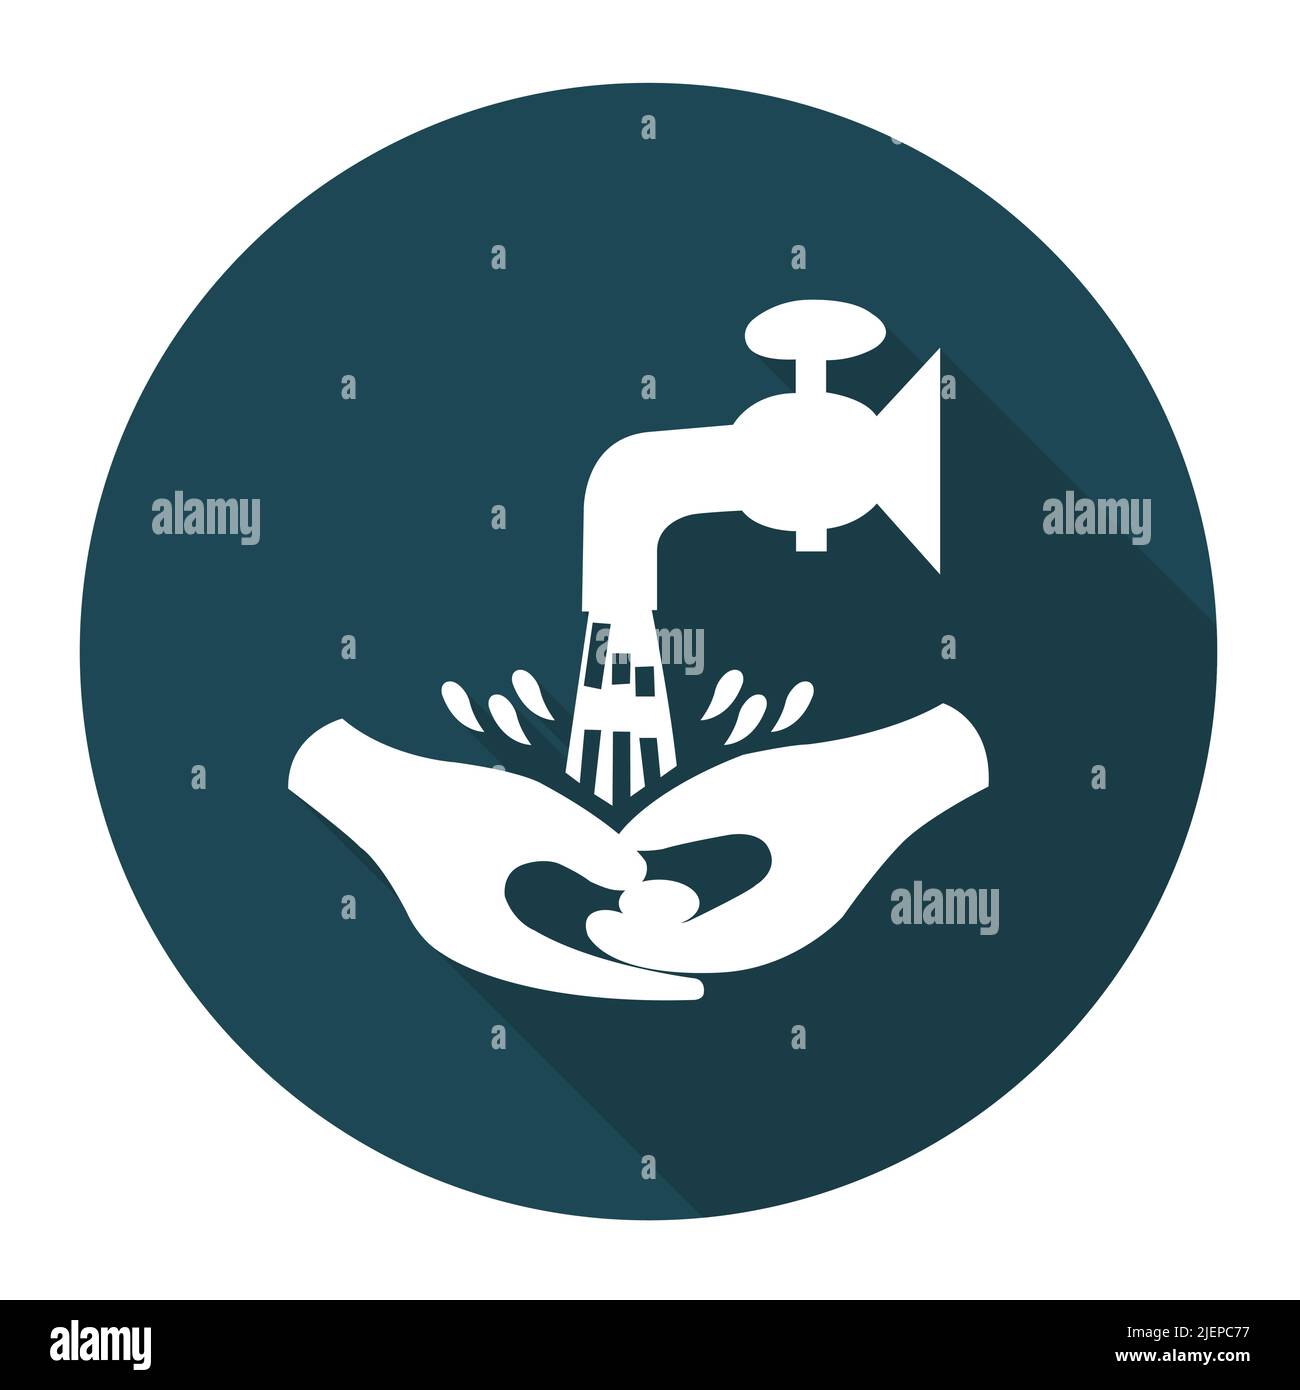 Symbol Wash Your Hands Please Isolate On White Background,Vector Illustration Stock Vector